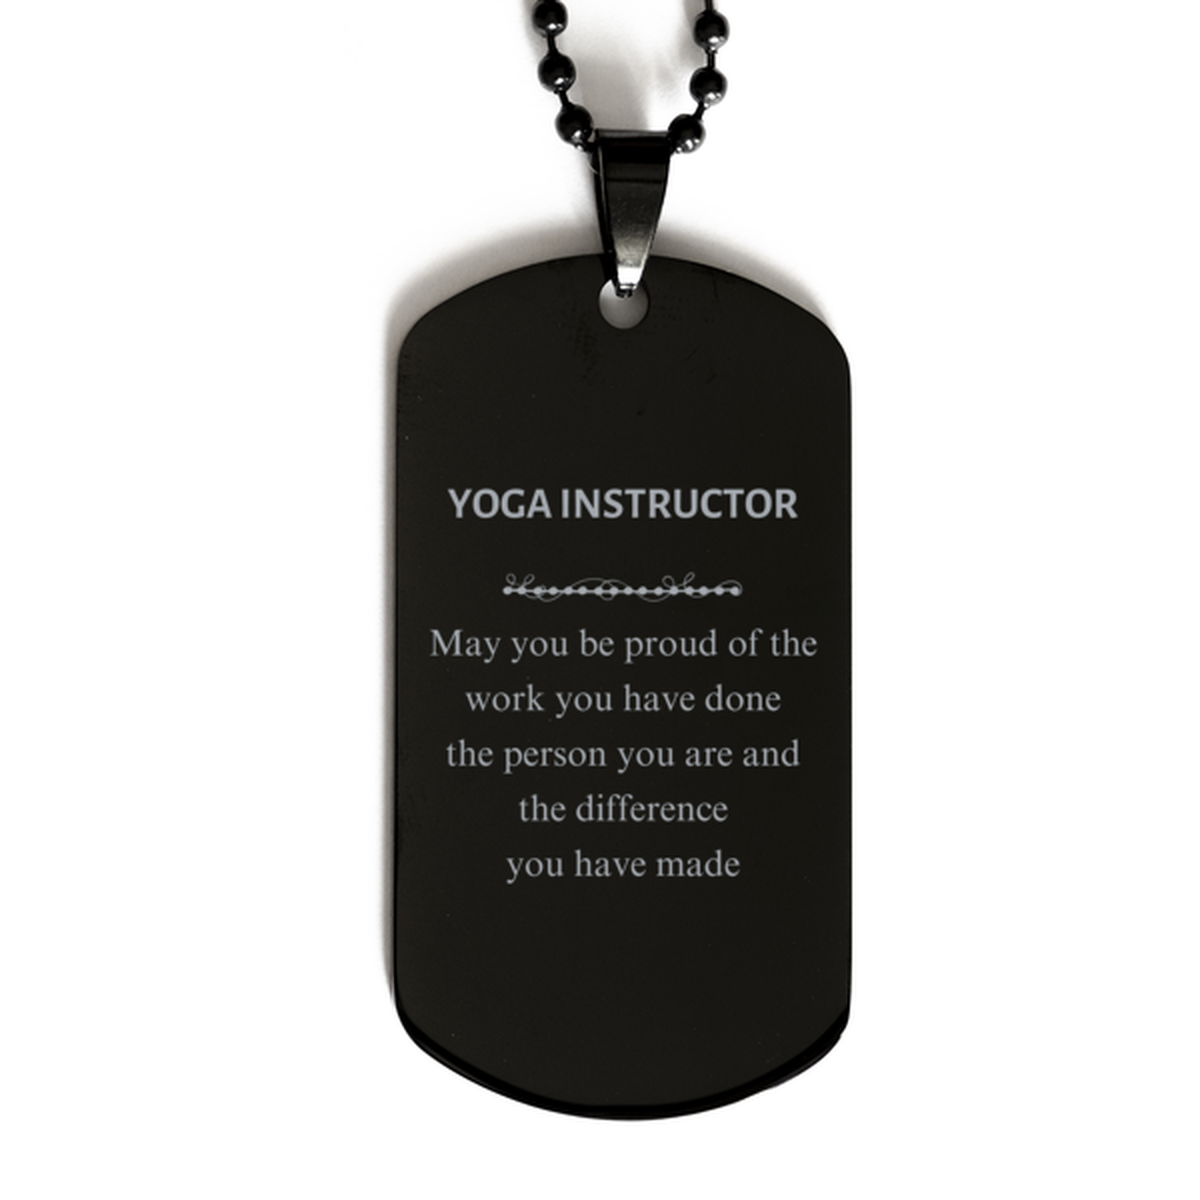 Yoga Instructor May you be proud of the work you have done, Retirement Yoga Instructor Black Dog Tag for Colleague Appreciation Gifts Amazing for Yoga Instructor